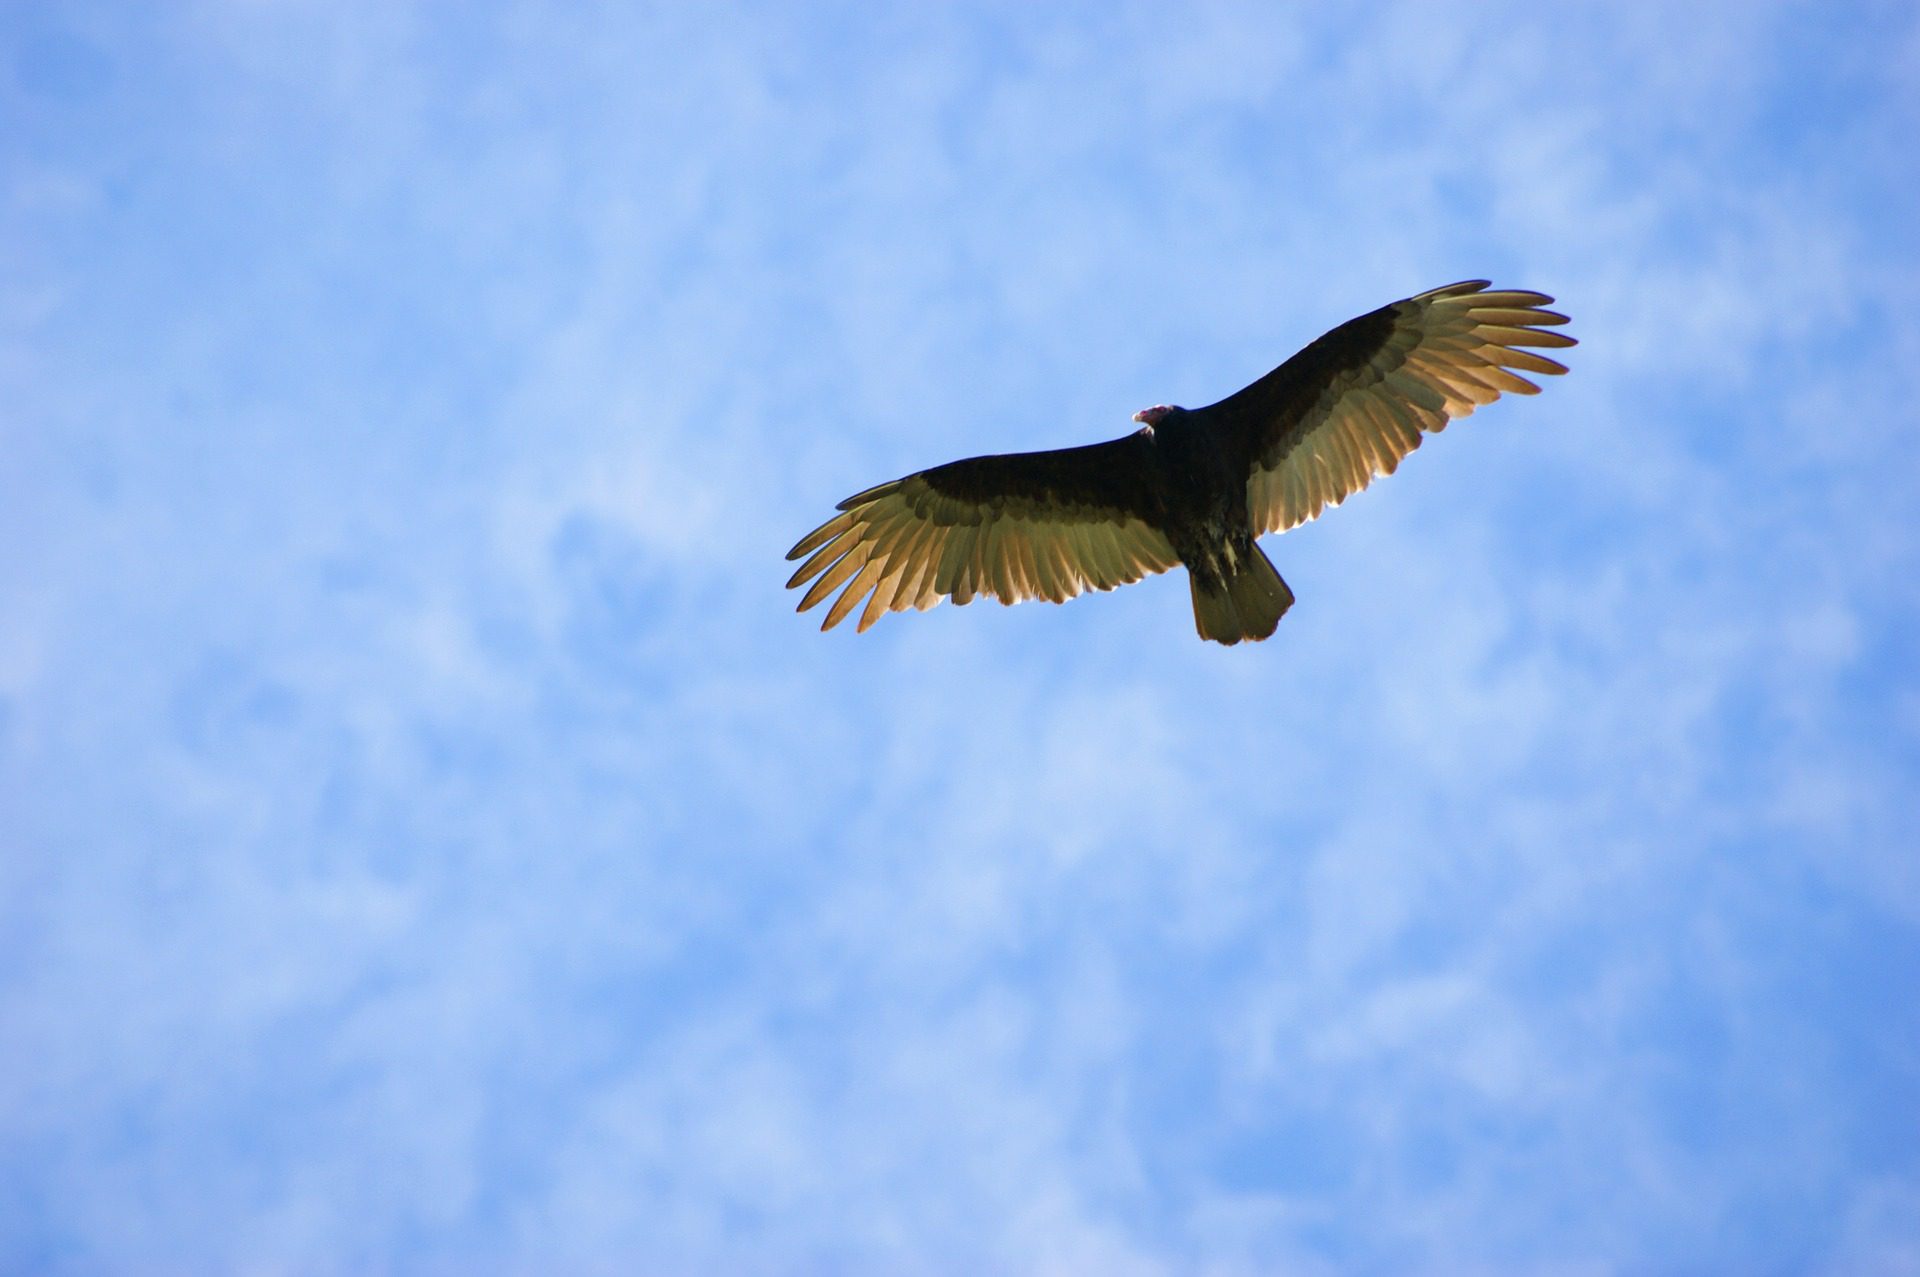 A stock image of a bird flying in Paraguay, where investors may benefit from outsourcing back office services